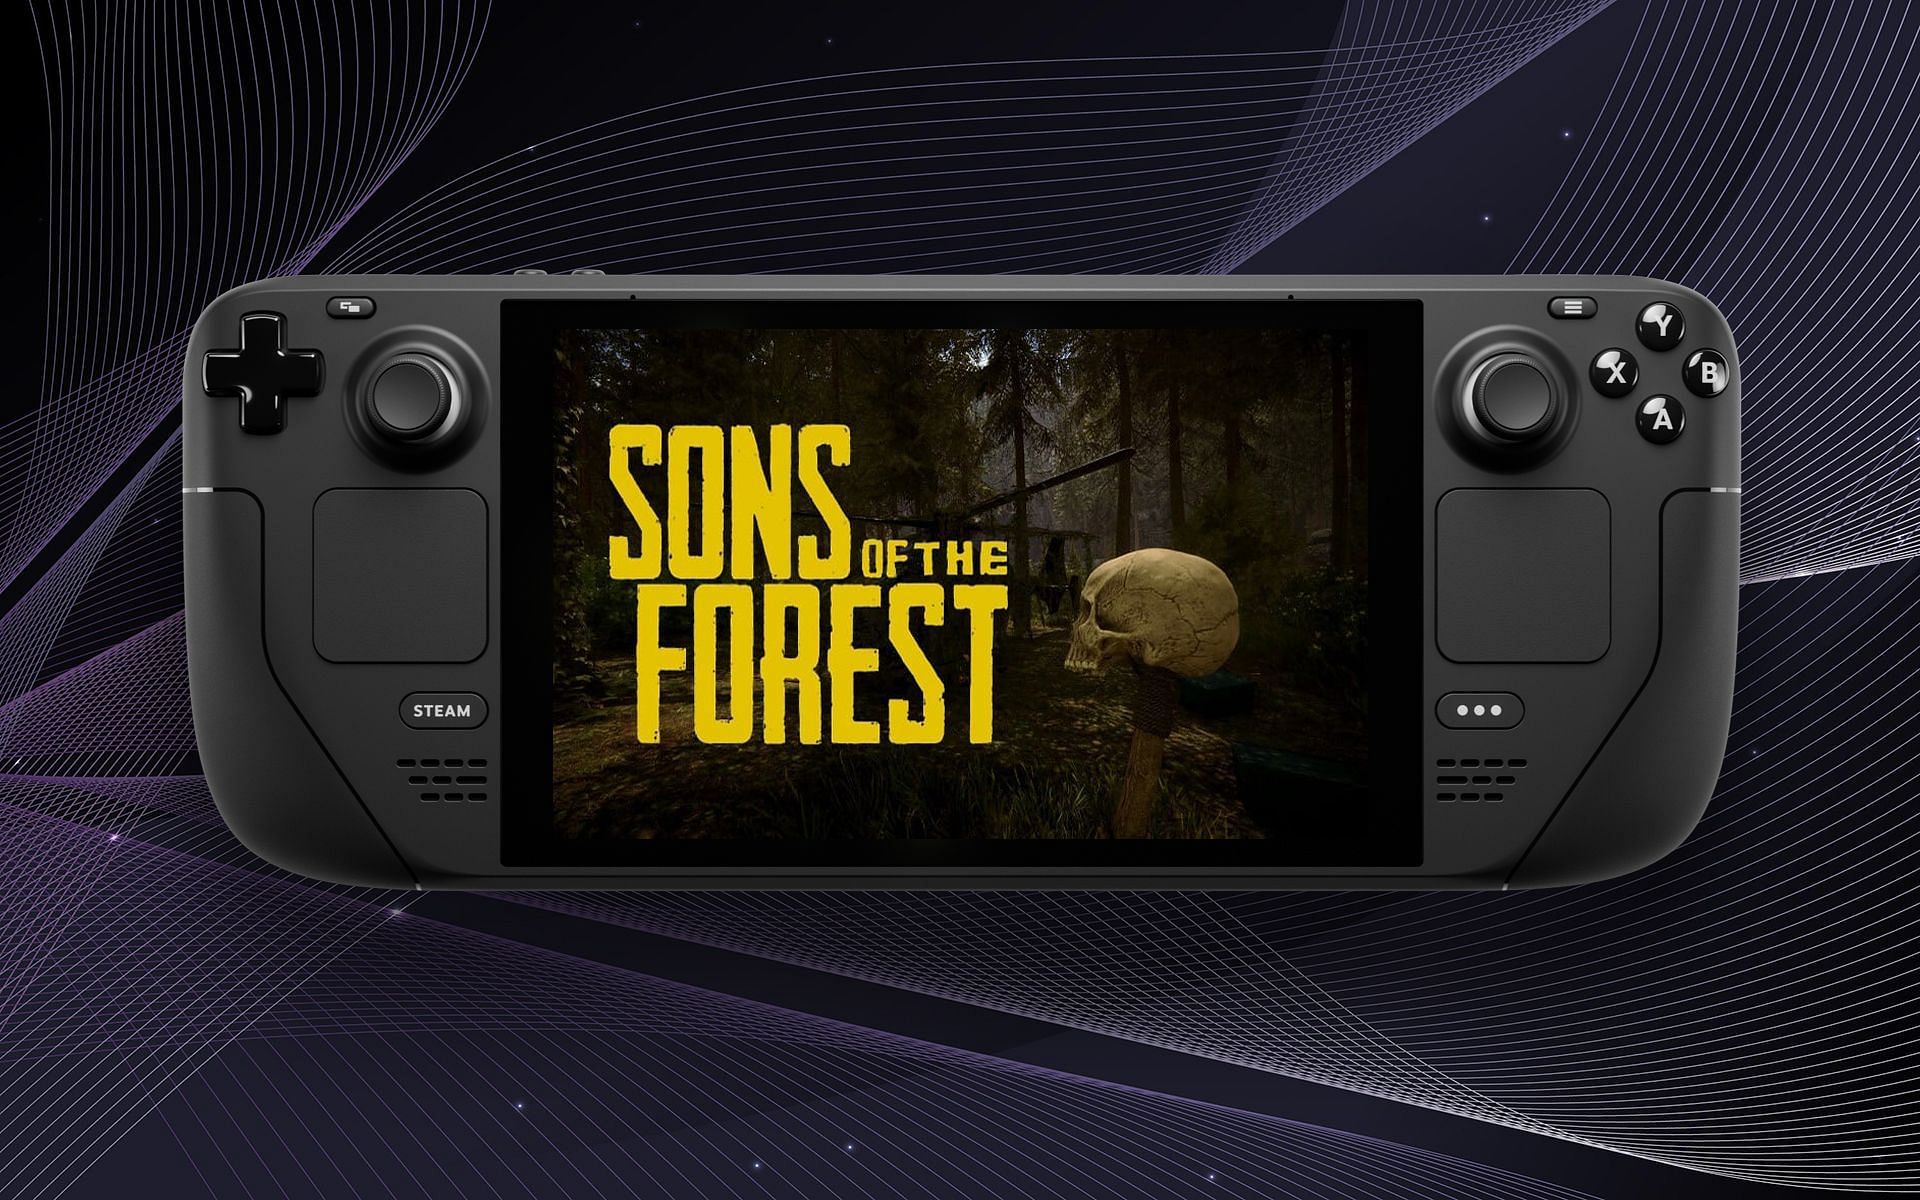 Sons Of The Forest on Steam